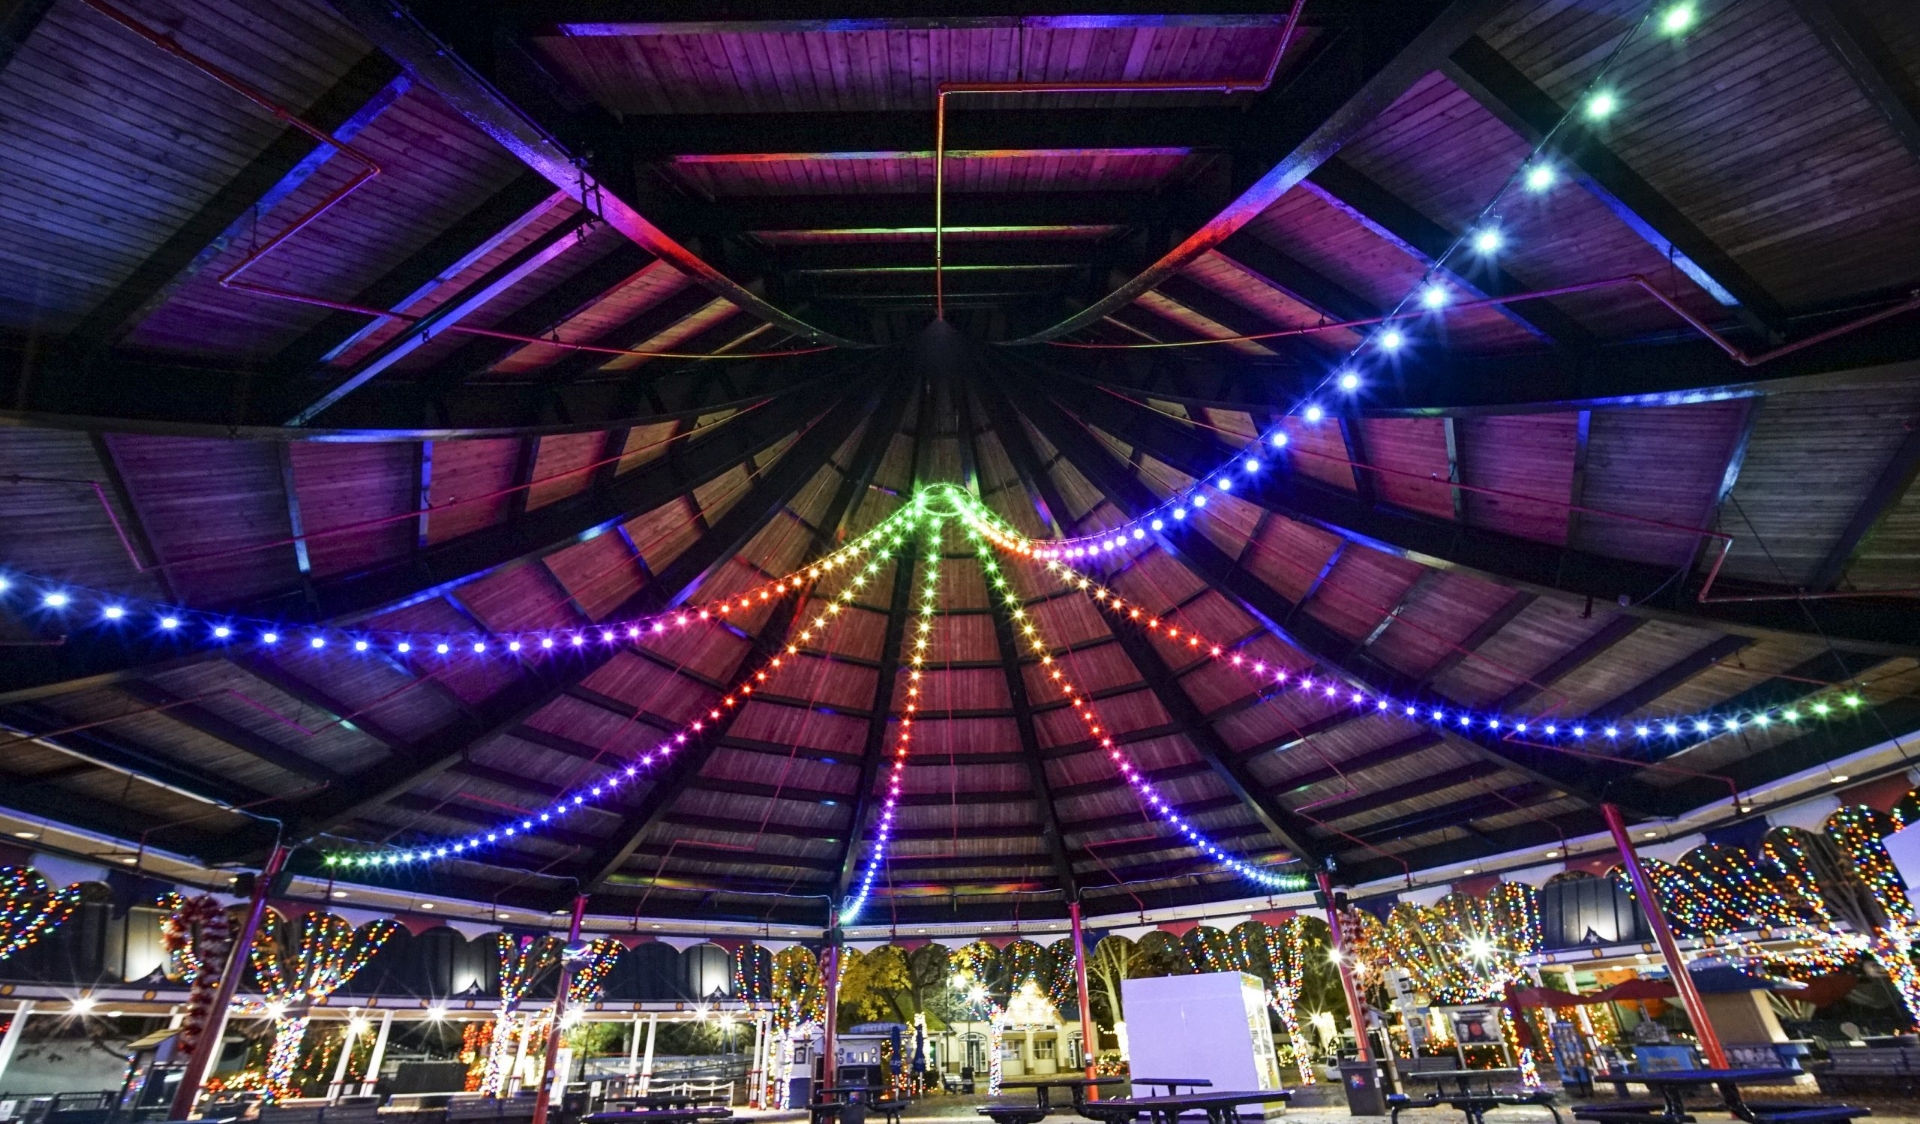 A Party Venue With High Wood Ceilings And Colored Neon String Lights.